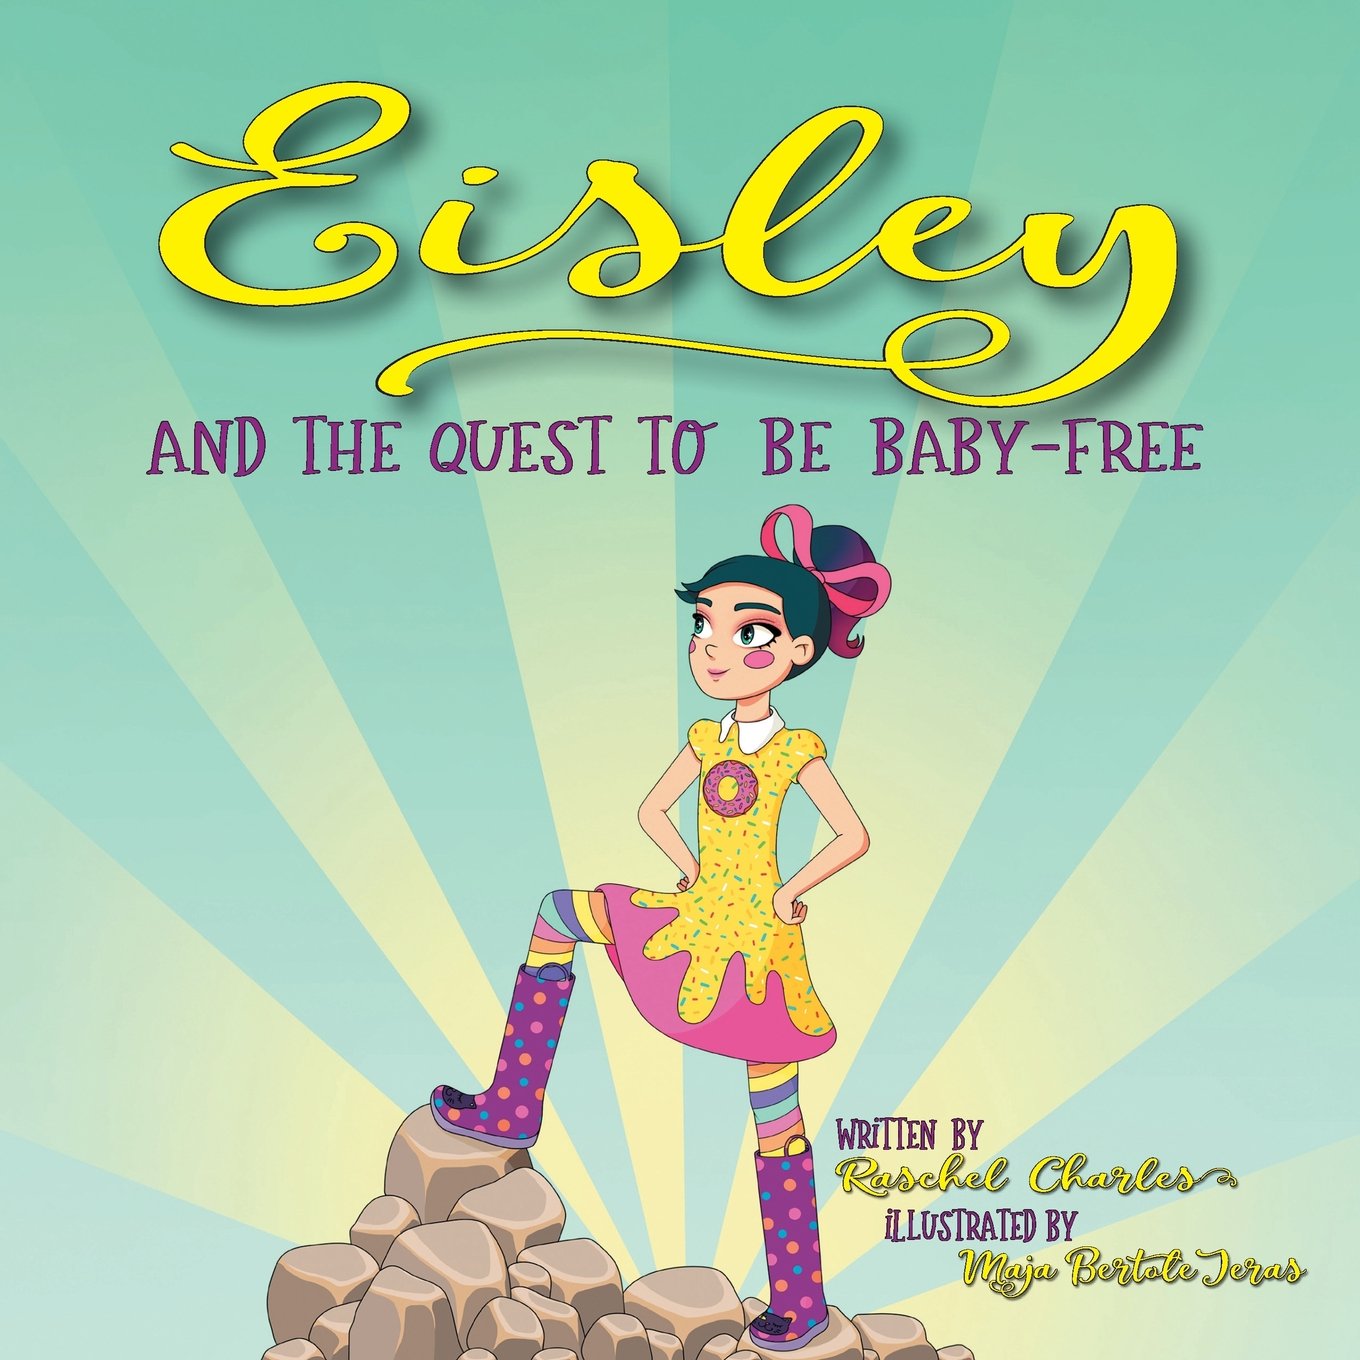 Q&A with Raschel Charles, Author of Eisley and the Quest to be Baby-Free